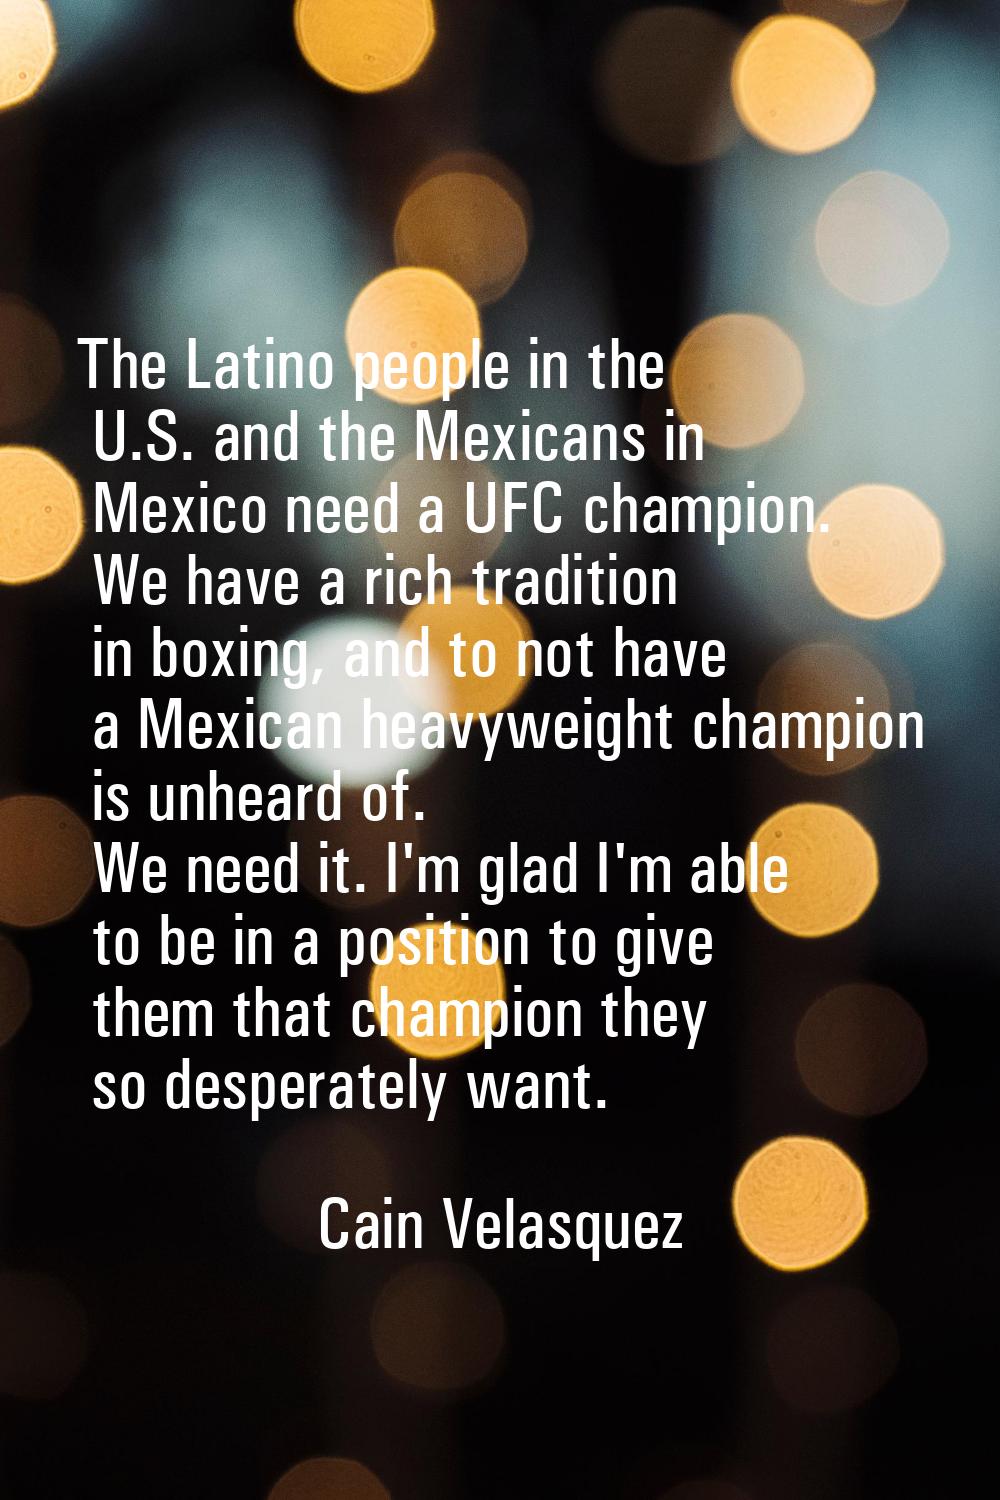 The Latino people in the U.S. and the Mexicans in Mexico need a UFC champion. We have a rich tradit